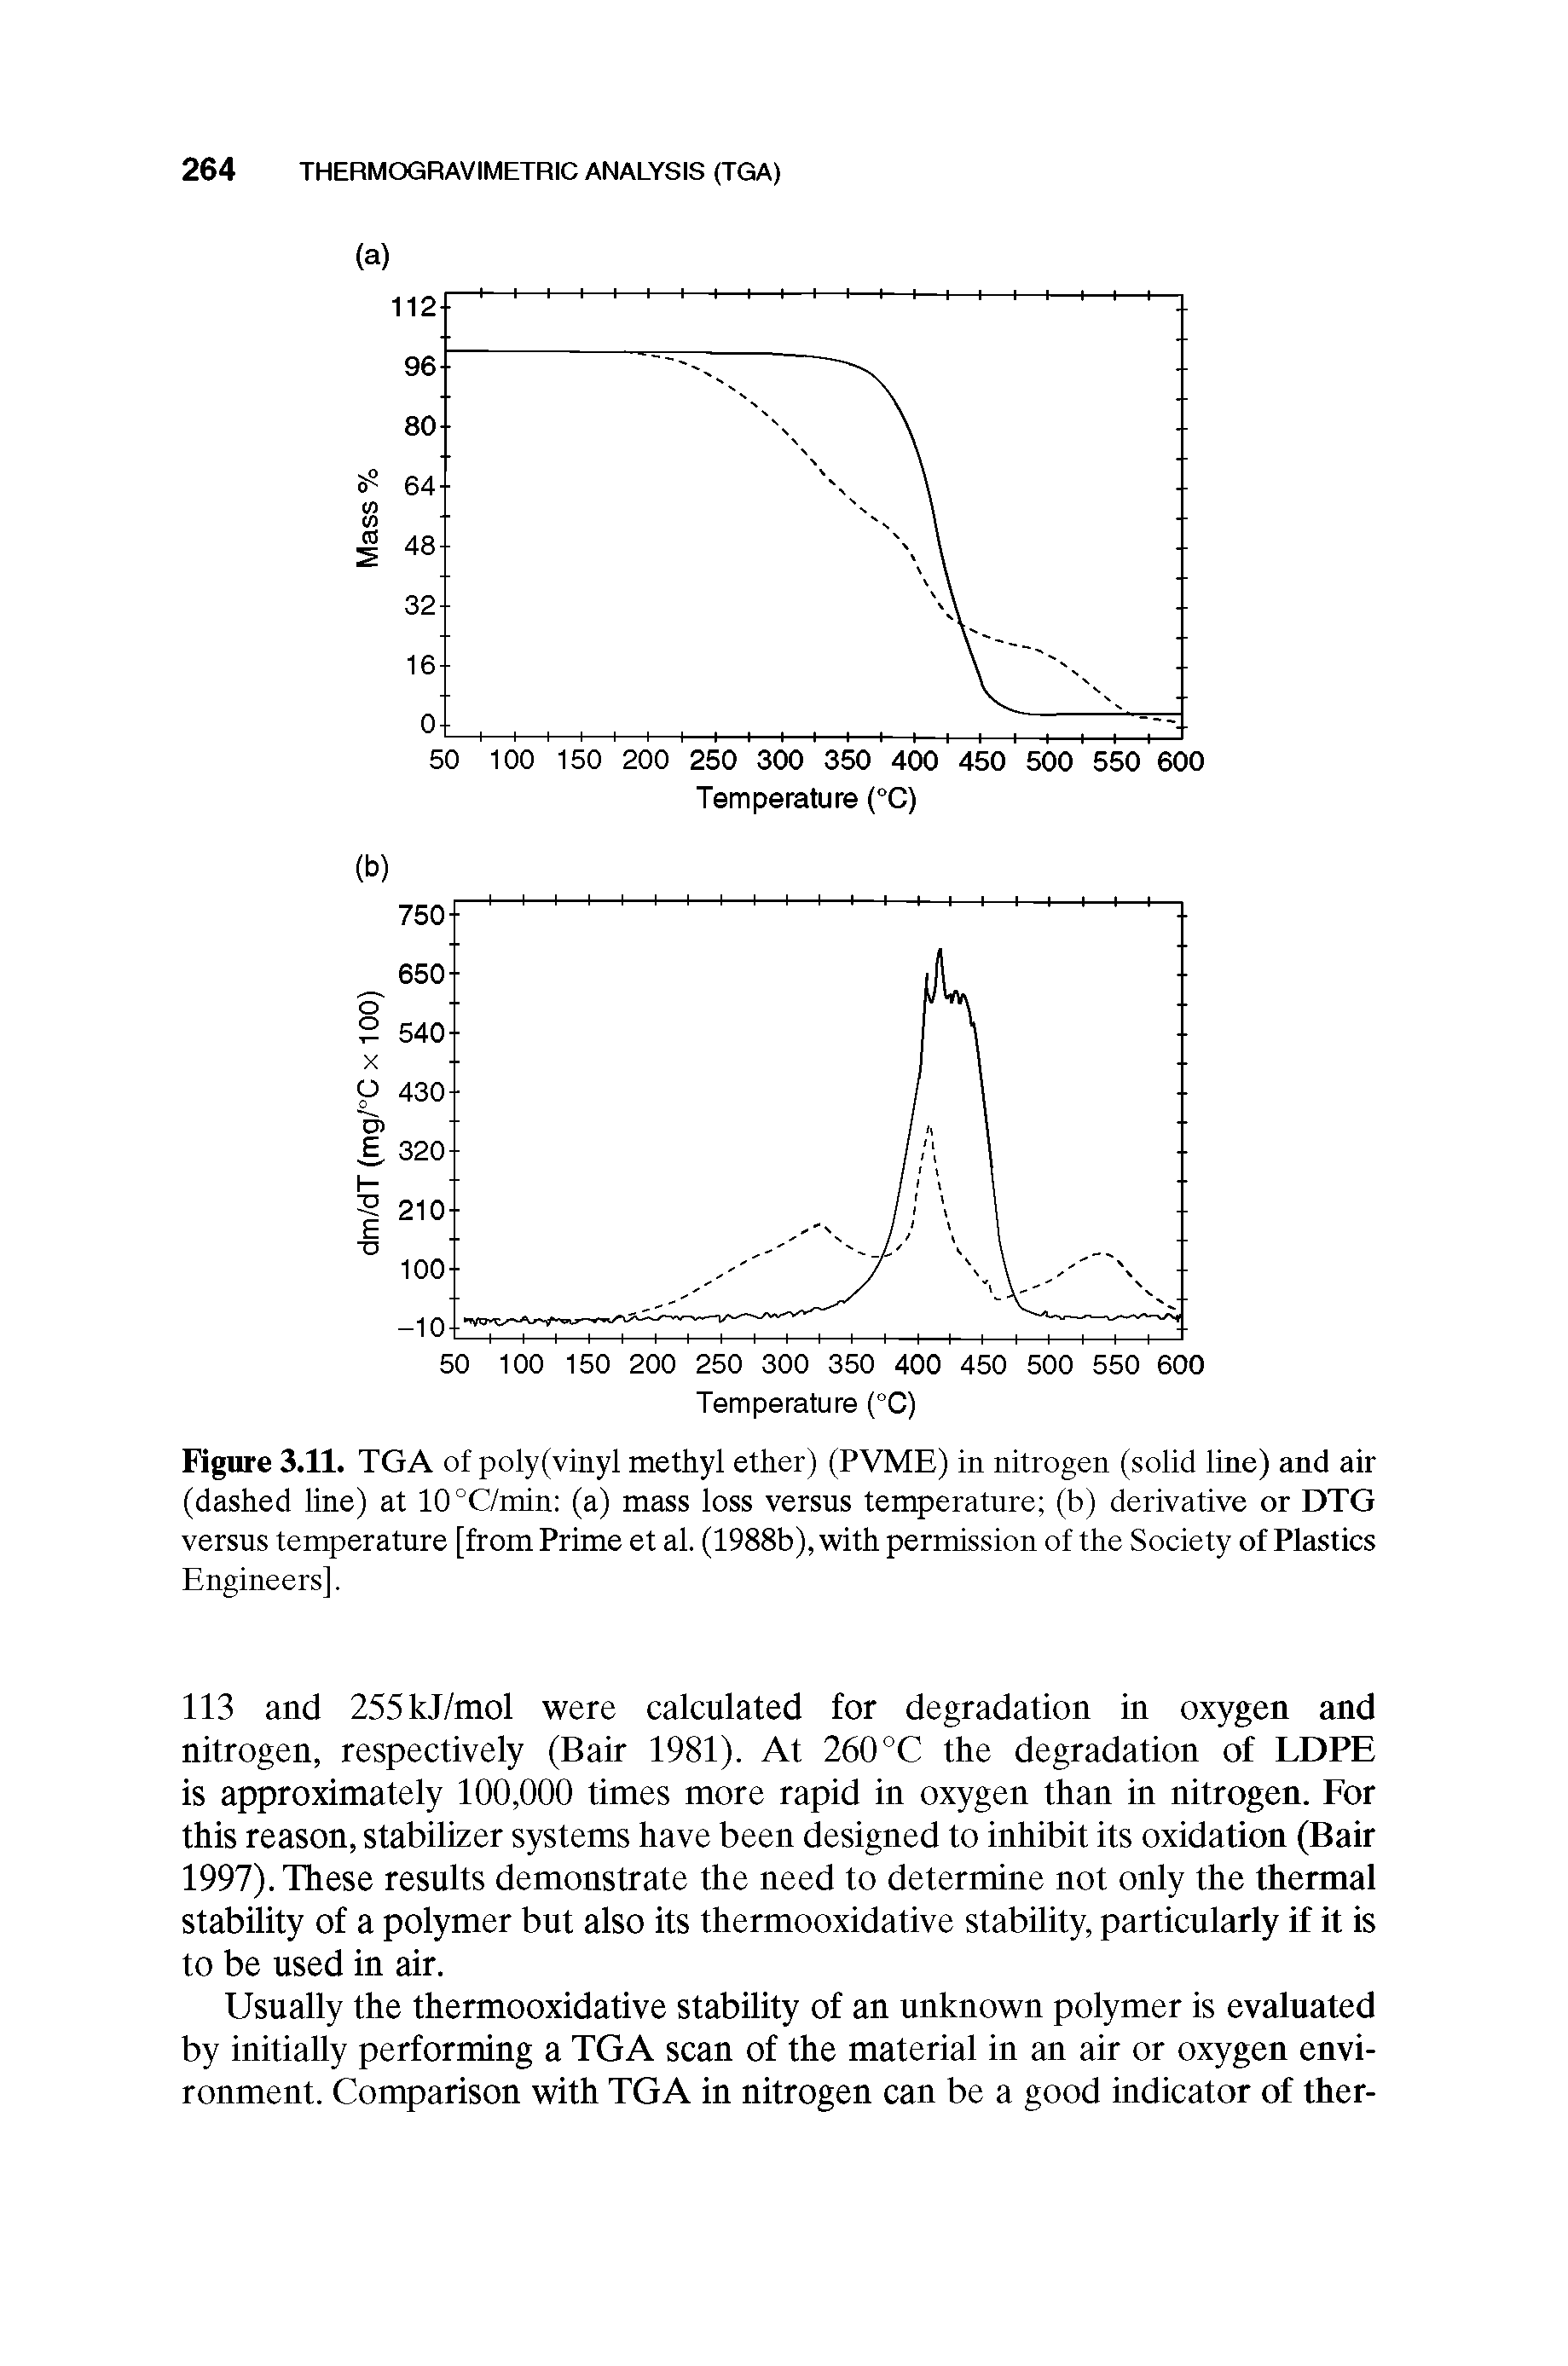 Figure 3.11. TGA of poly(vinyl methyl ether) (PVME) in nitrogen (solid line) and air (dashed line) at 10°C/min (a) mass loss versus temperatnre (b) derivative or DTG versus temperature [from Prime et al. (1988b), with permission of the Society of Plastics...